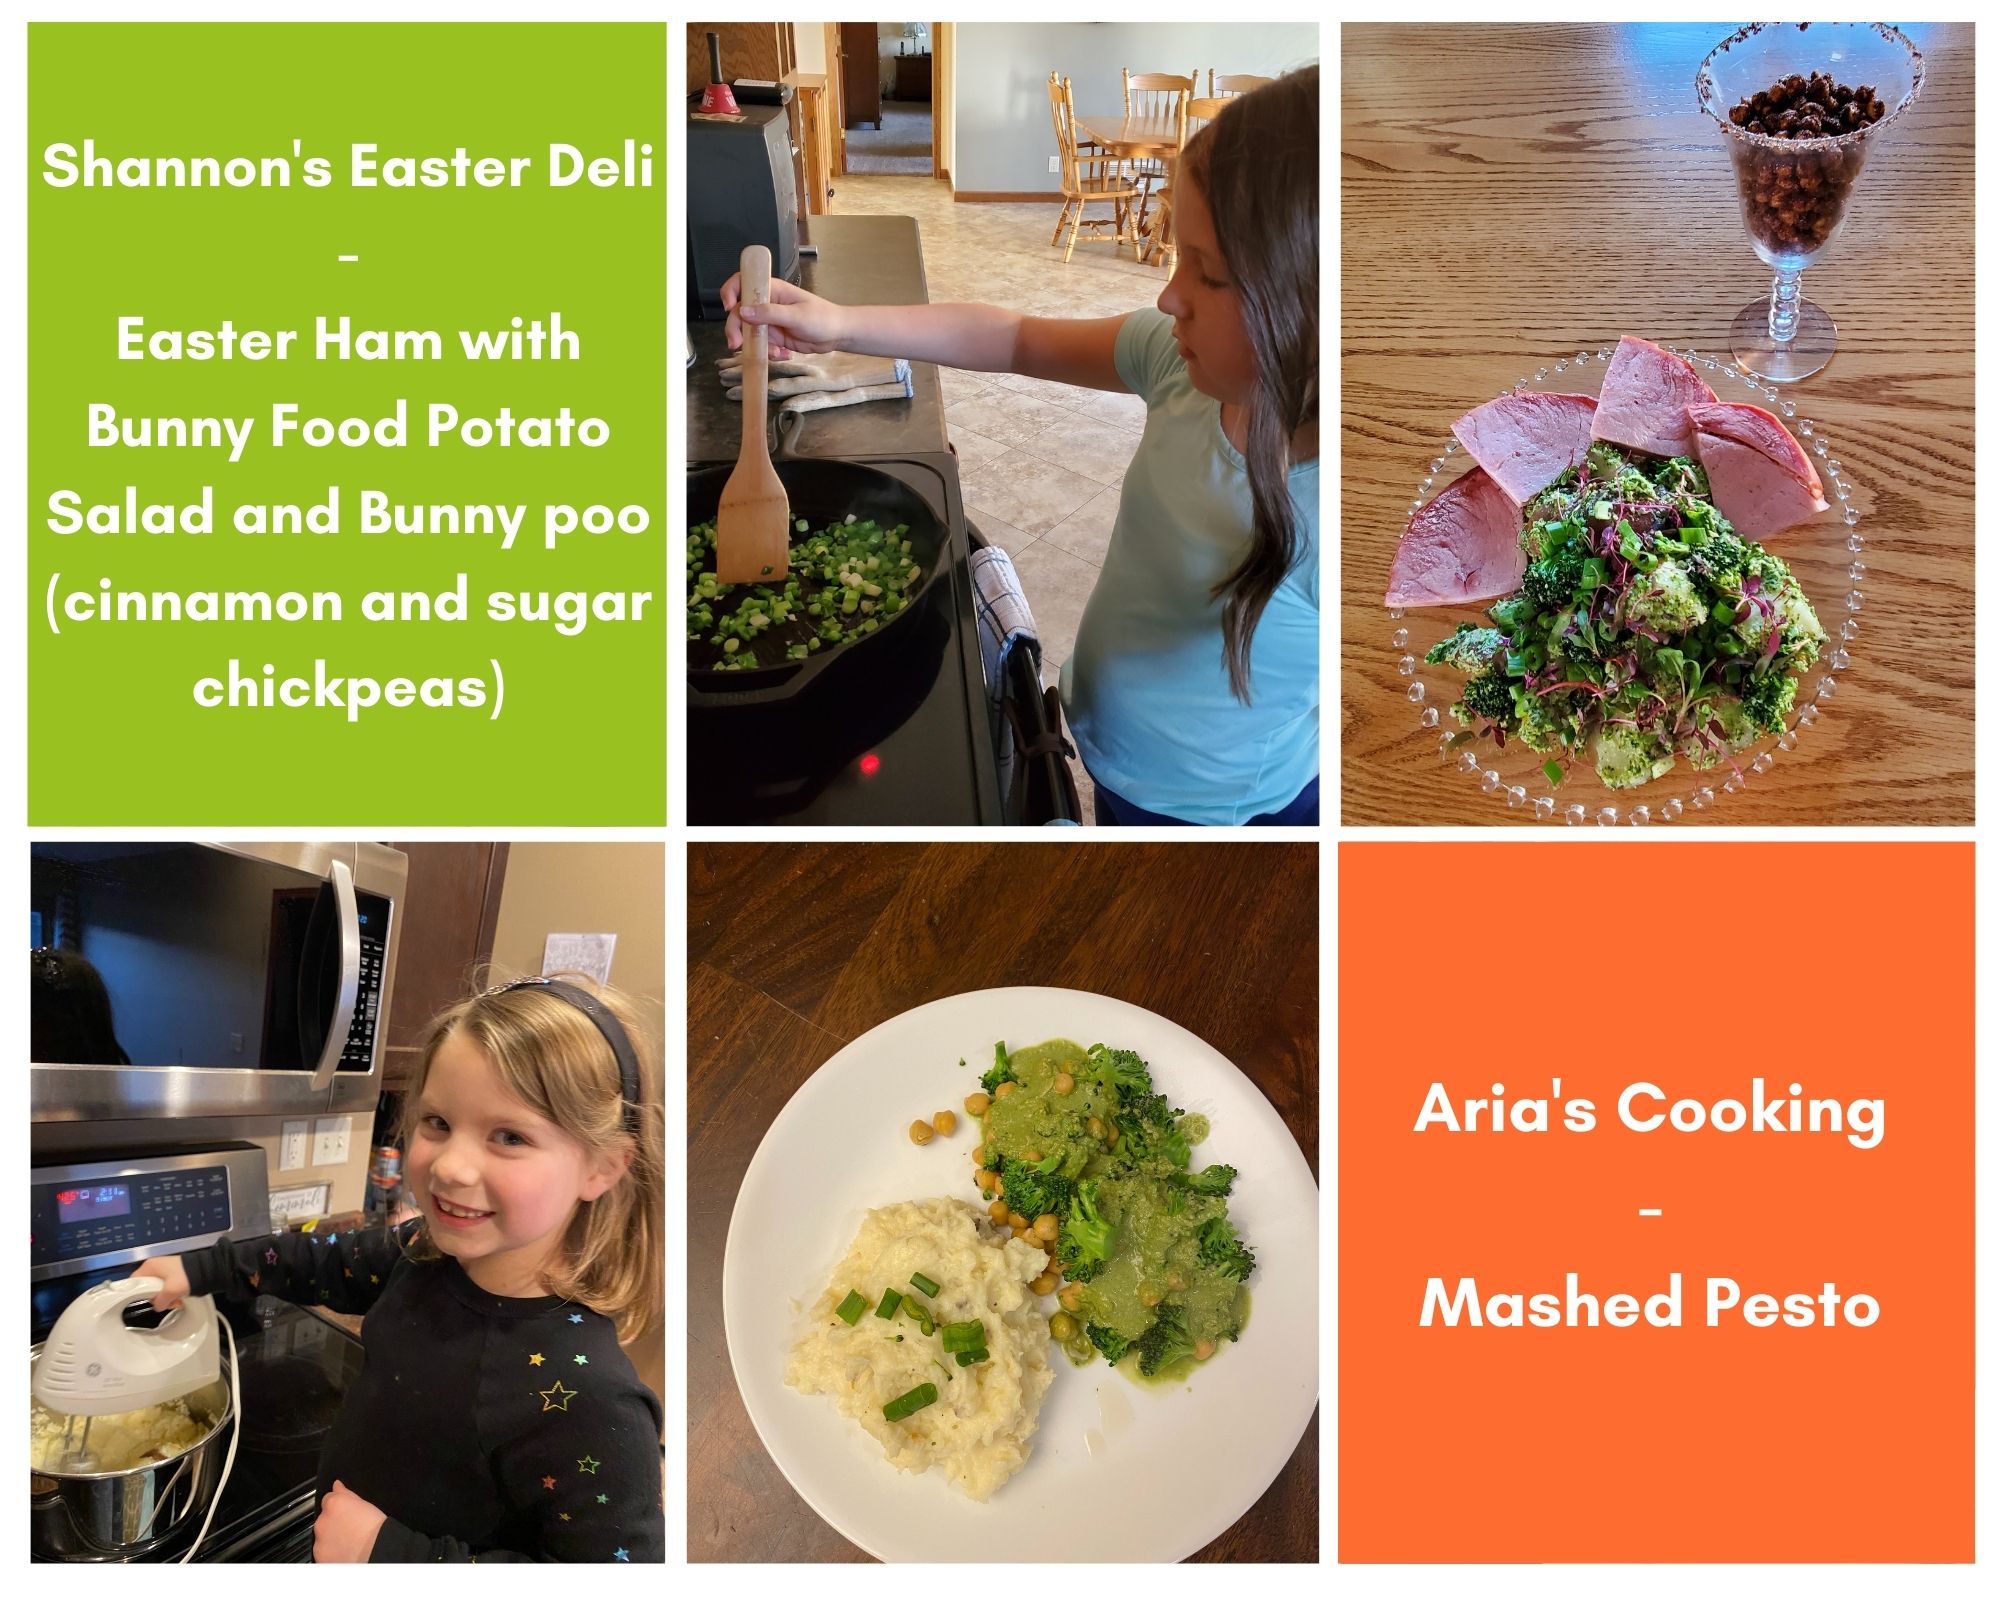 Shannon's Easter Deli and Aria's Cooking